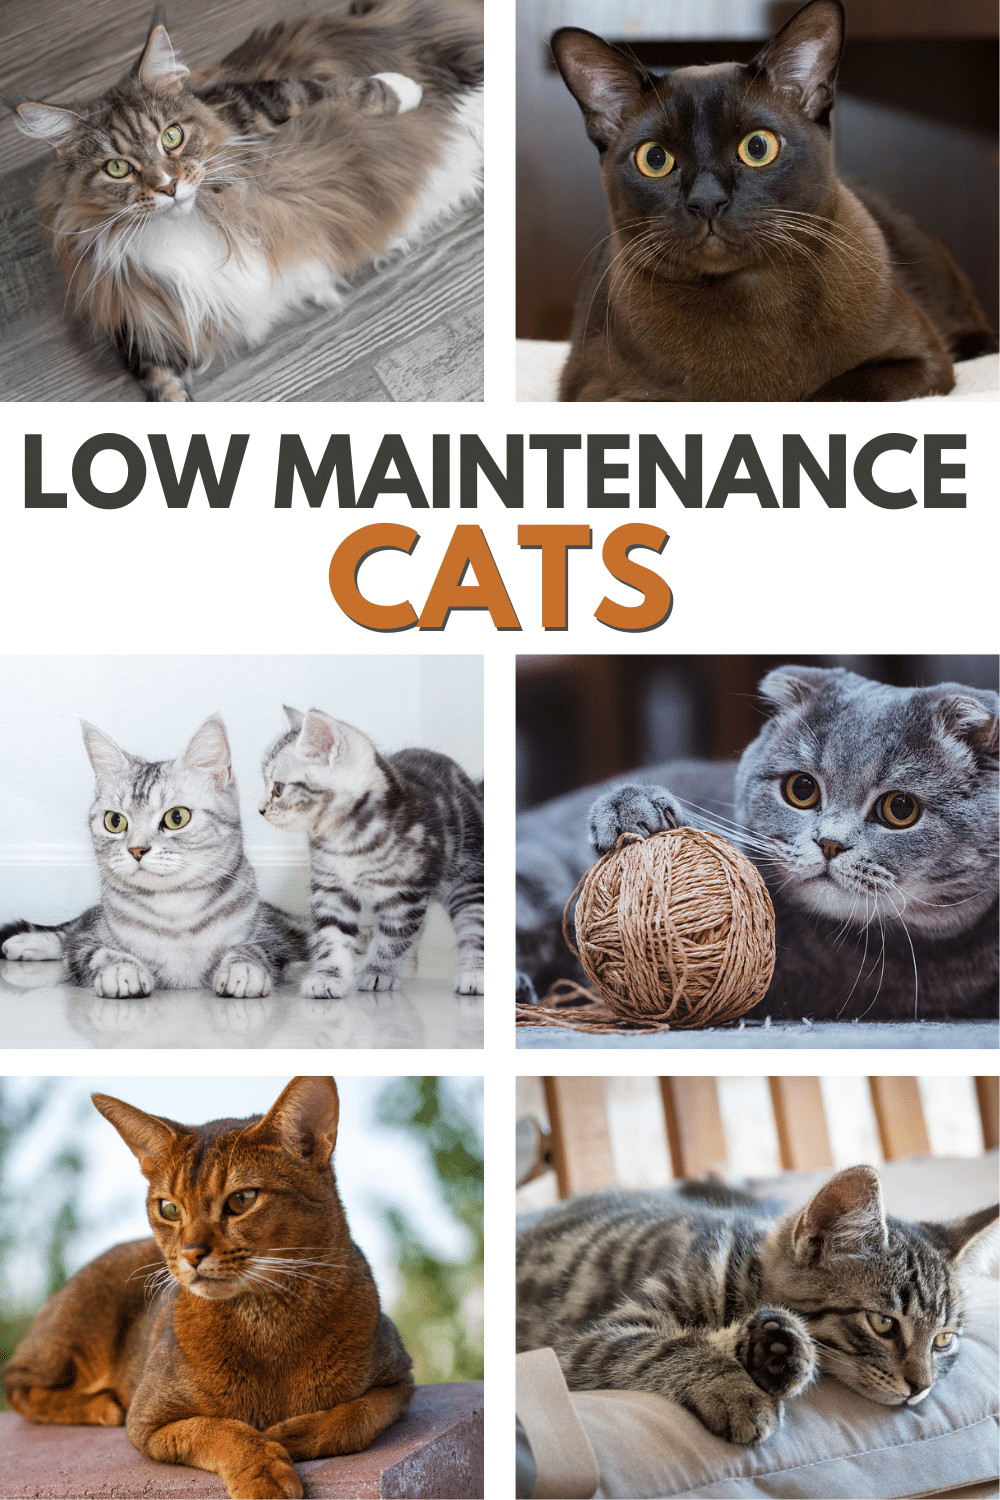 Low-maintenance cats are pets that even first-time pet owners can successfully raise.  If your kids want a cat, choose a low maintenance one. #lowmaintenancecats #lowmaintenance #catbreed #wanttogetacat #lowmaintenancepet via @wondermomwannab